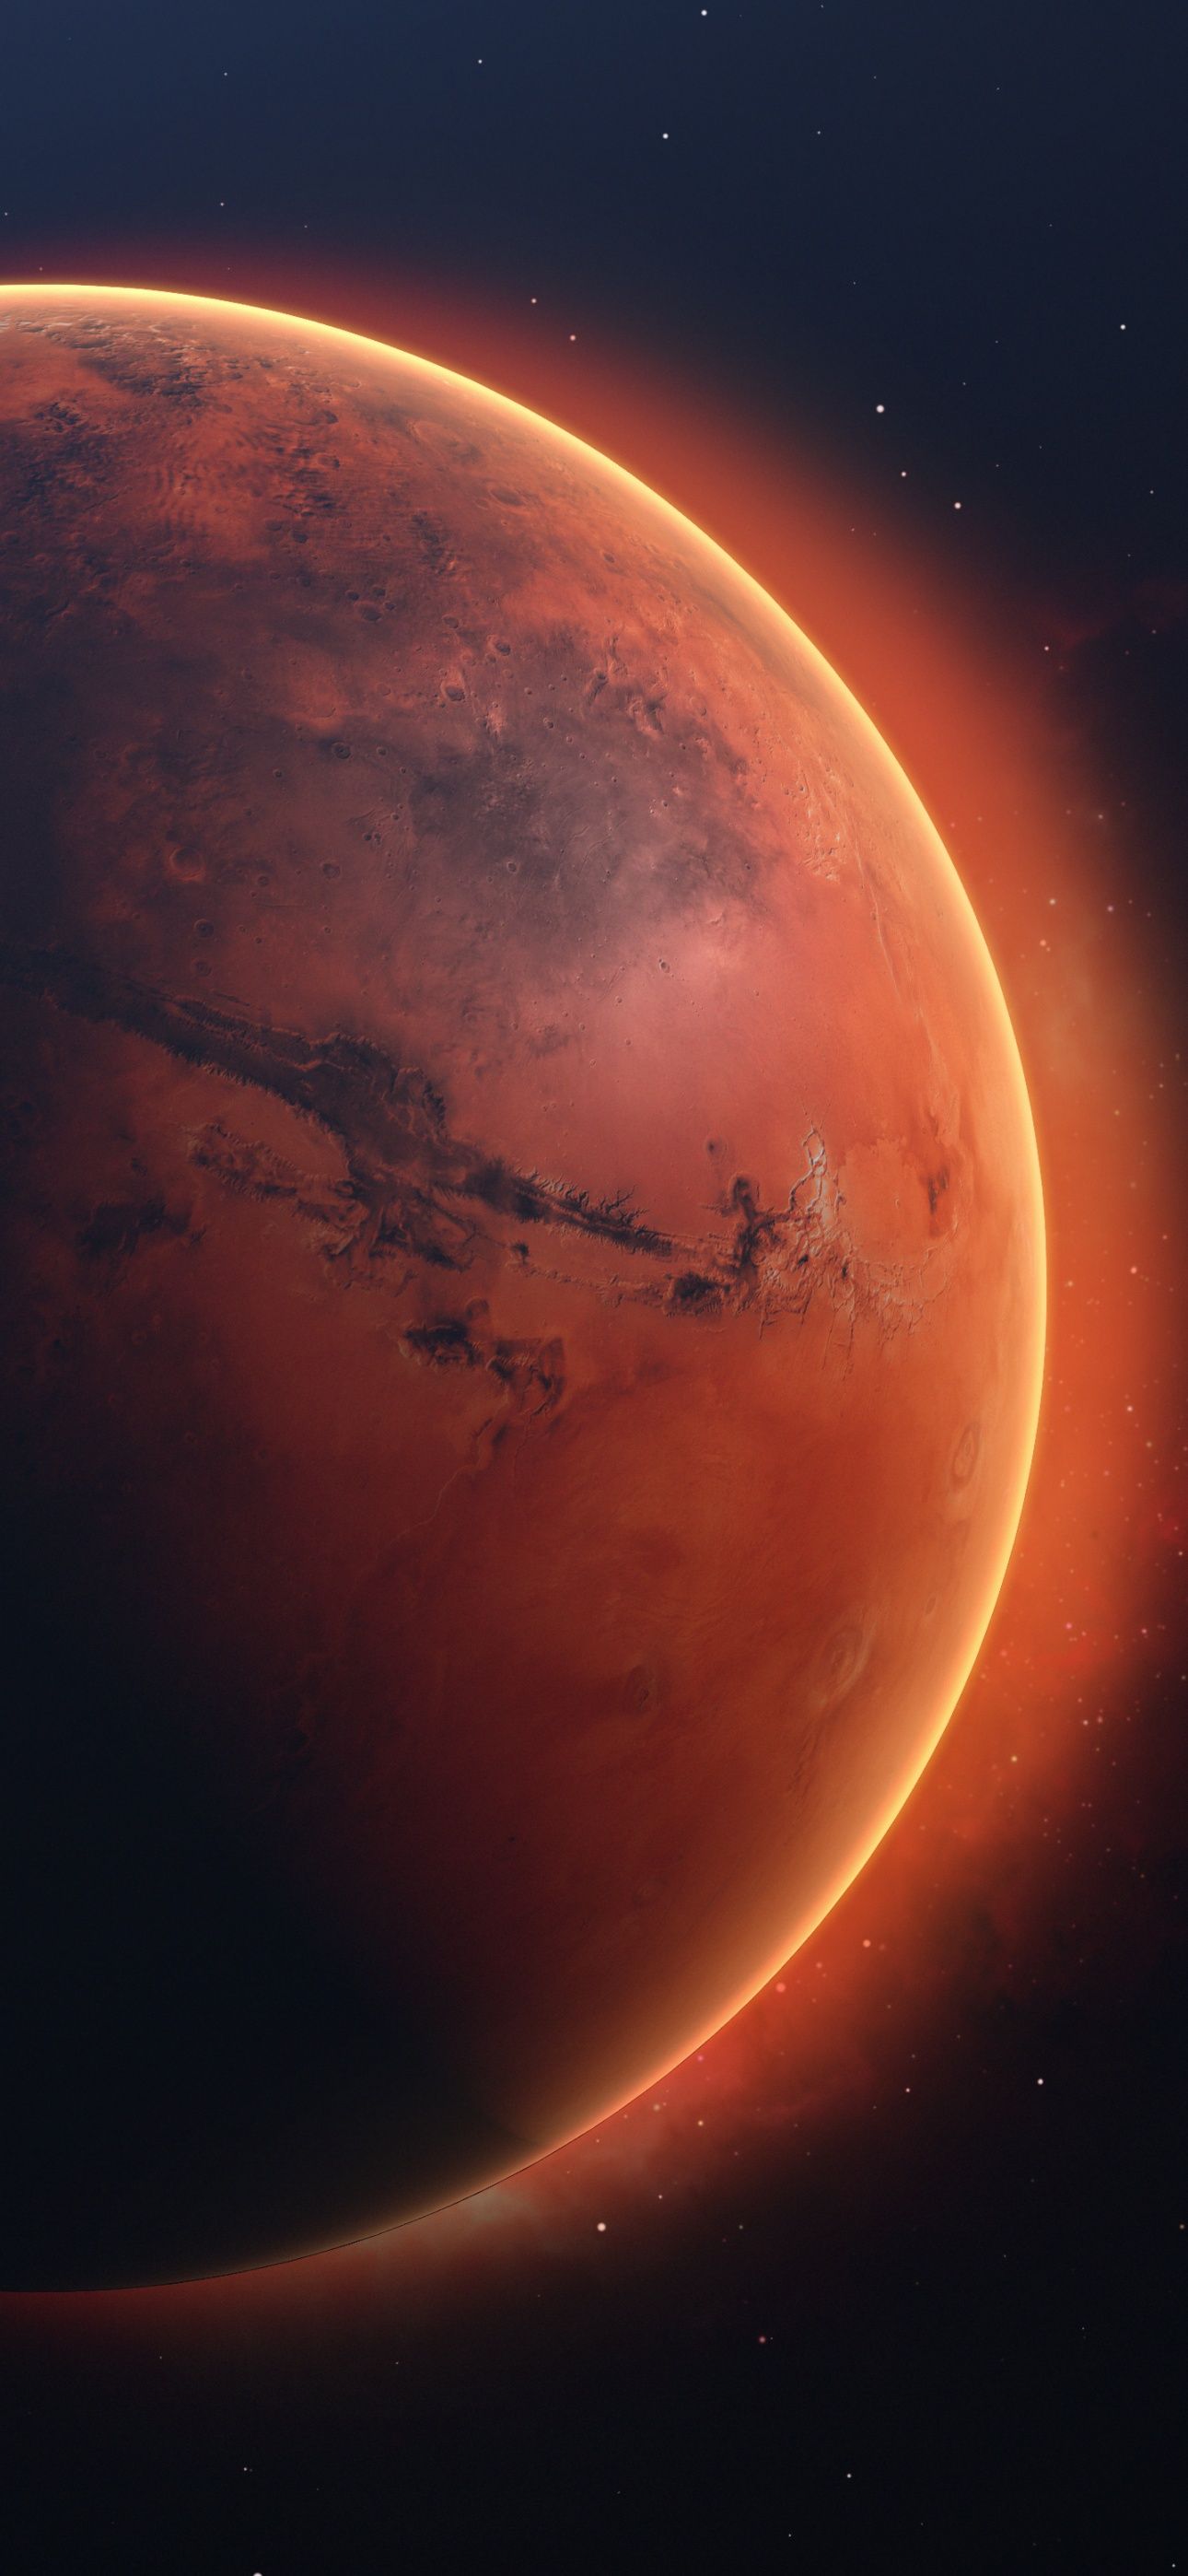 A picture of the planet Mars - Mars